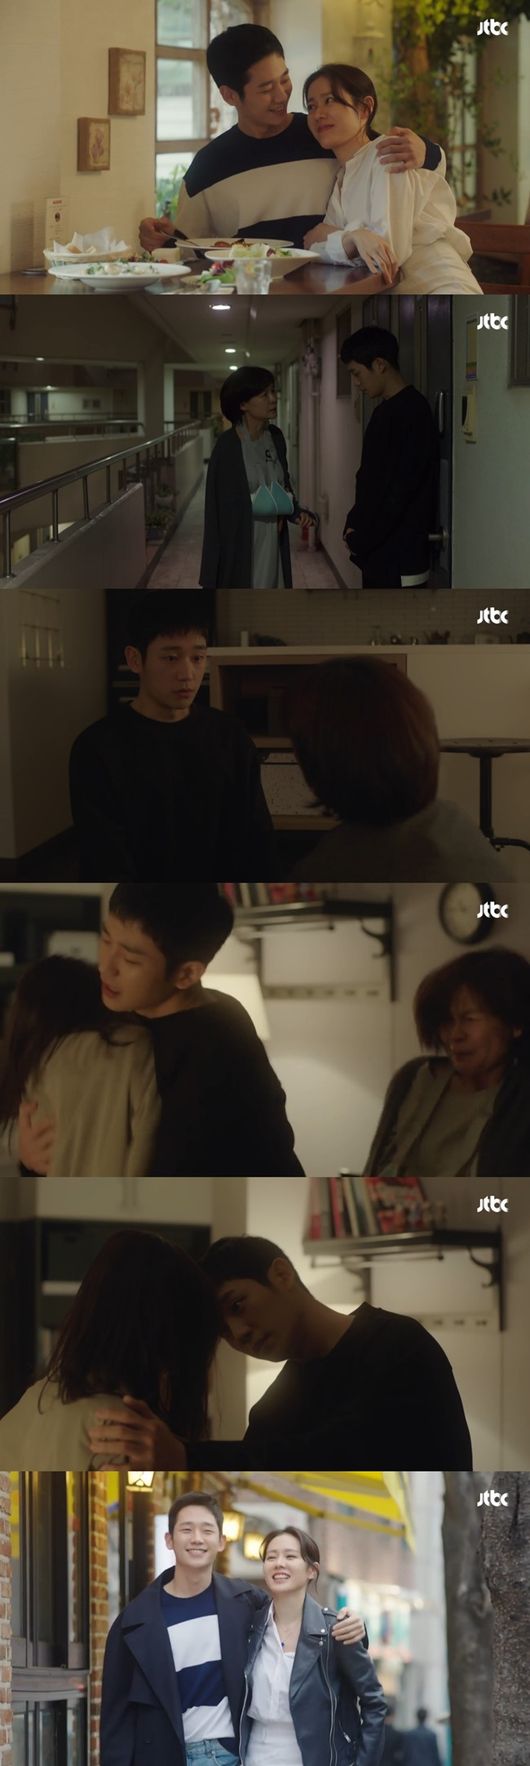 The love of Jung Hae In, a beautiful sister, is beautiful. As the heart toward Son Ye-jin grows, we are more affectionate and desperate for each other.Jung Hae In, who is showing his growing love for Son Ye-jin despite the opposition. JTBCs drama Bob Good Sister (played by Kim Eun, directed by Ahn Pan-seok) was broadcast on the afternoon of the 4th, and he was strong against Kim Miyeon (played by Gil Hae-yeon) The love of Jung Hae In) was drawn.Kim Miyeon visited the house of Seo Jun-hee after learning that Yoon Jin-ah (Son Ye-jin) left the house in the middle of the night.Seo Jun-hee was embarrassed but tried to keep Yoon Jin-ah from being hurt.Seo Jun-hee told Yoon Jin-ah that a friend had come and went out alone and persuaded Kim Miyeon.Ill send Yon Jin-ah back, so give me a minute.Seo Jun-hee, who met Kim Miyeon again after sending Yoon Jin-ah home, thought that if Kim Miyeon and Yoon Jin-ah encountered him, Yon Jin-ah would be hurt.Seo Jun-hee, who met Kim Miyeons dramatic character He also expressed his thoughts that he could not give up on Yon Jin-ah even in opposition.Kim Miyeon beat Seo Jun-hee, verbally and soothingly urged him to break up with Yoon Jin-ah.But Seo Jun-hee was already in love with Yoon Jin-ah.Because they were two people who grew up in each other, they could not break up with Kim Miyeons opposition.Rather, love was getting harder.Seo Jun-hee showed his heart to Yoon Jin-ah so straight that he was ready to confront anyones objections.It was Seo Jun-hee who wanted to be open to everyone and allowed, not secret love, from the beginning of his love affair with Yoon Jin-ah early on.It was Seo Jun-hee who showed love for Yon Jin-ah without shaking even after revealing his love to the Yoon Jin-ah family and his sister Seo Kyung-sun (since the lady).It is Seo Jun-hee who kept Yoon Jin-ahs side even when Yoon Jin-ah was struggling because of the harassment of his ex-boyfriend Lee Kyu-min (Oh Ryeong-min).Even when Yoon Jin-ah was struggling because of his company boss, Seo Jun-hee was a force.It was Seo Jun-hee who kept so strong that he loved Yoon Jin-ah and gave him generous love and loved Yoon Jin-ah with all his heart.